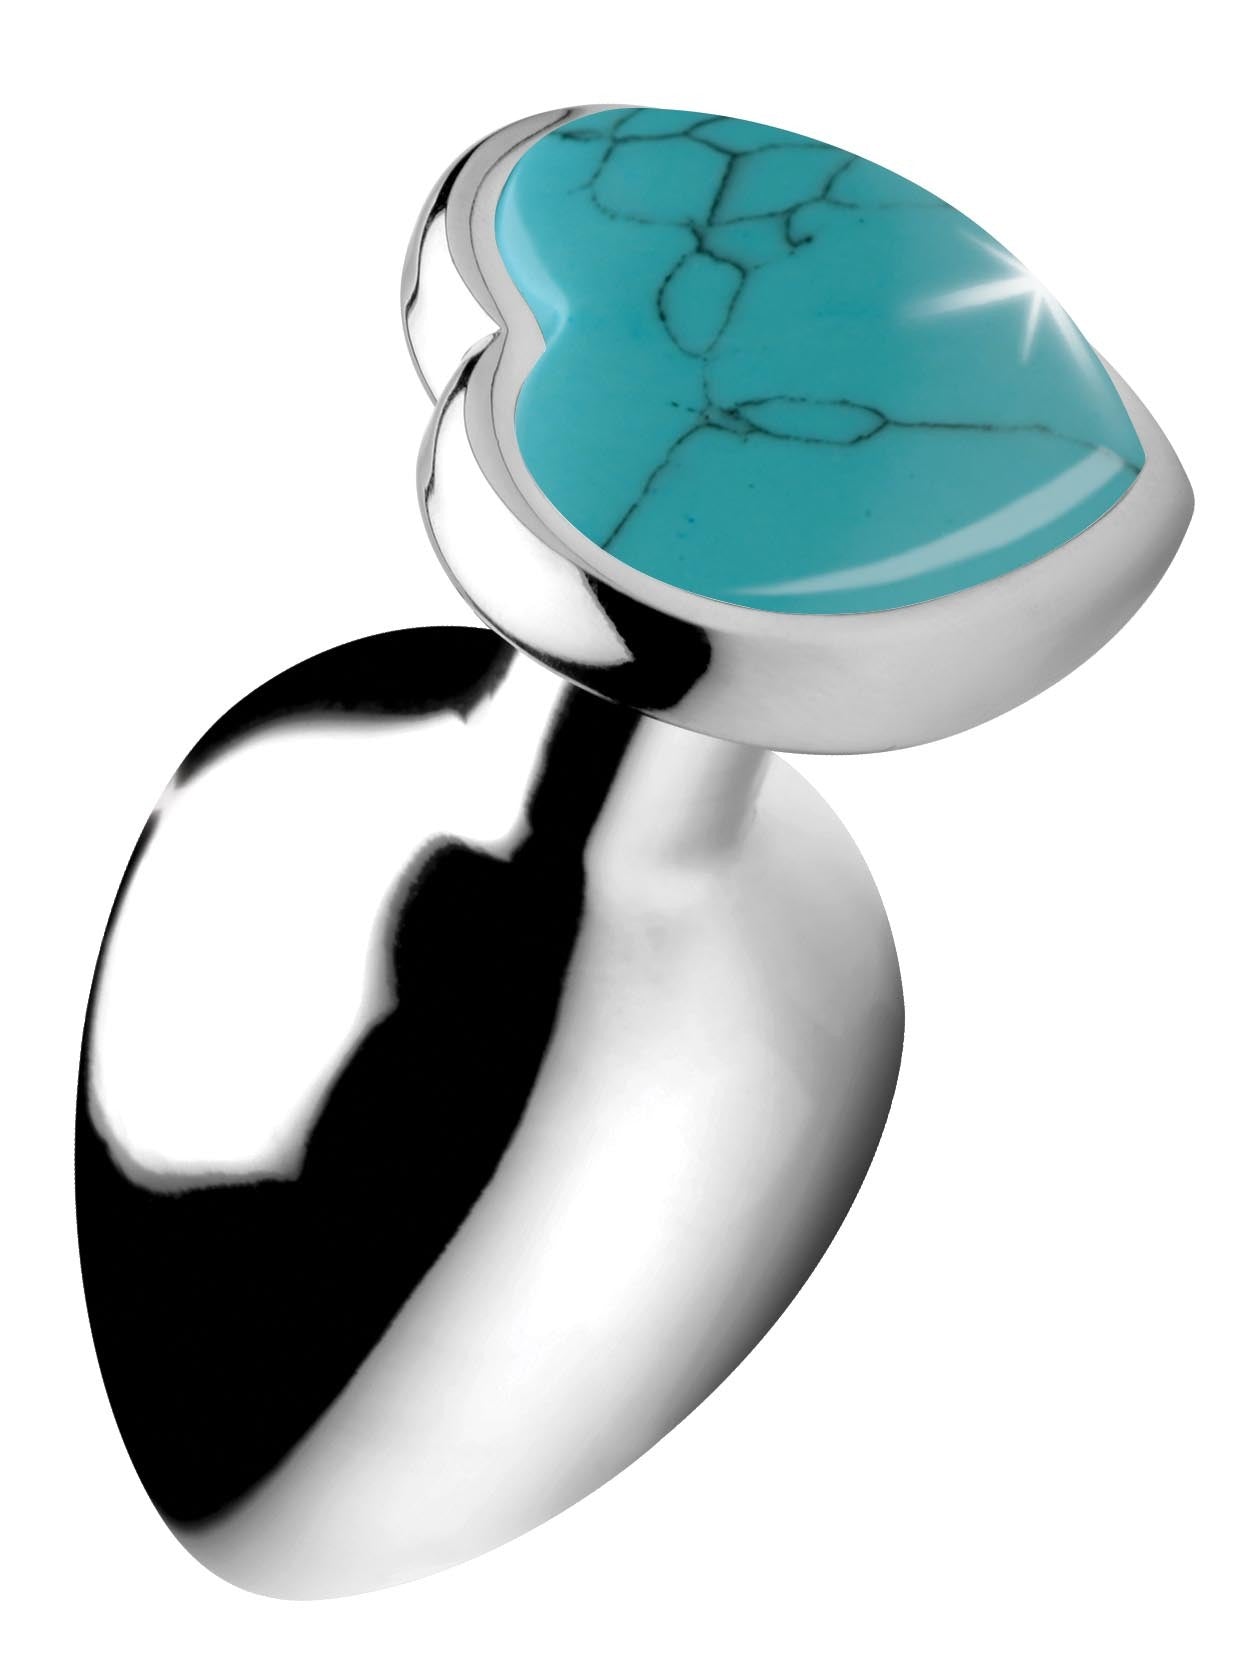 Turquoise Heart Anal Plug - Lg. CupidsSecretStash.com
Revitalize your booty with positive energy of a genuine heart-shaped Turquoise Gem butt plug! Protecting your aura from negative energy. Cupid’s Secret Stash Anal Toys
Booty Sparks 


Title: Default Title


Cupid’s Secret Stash